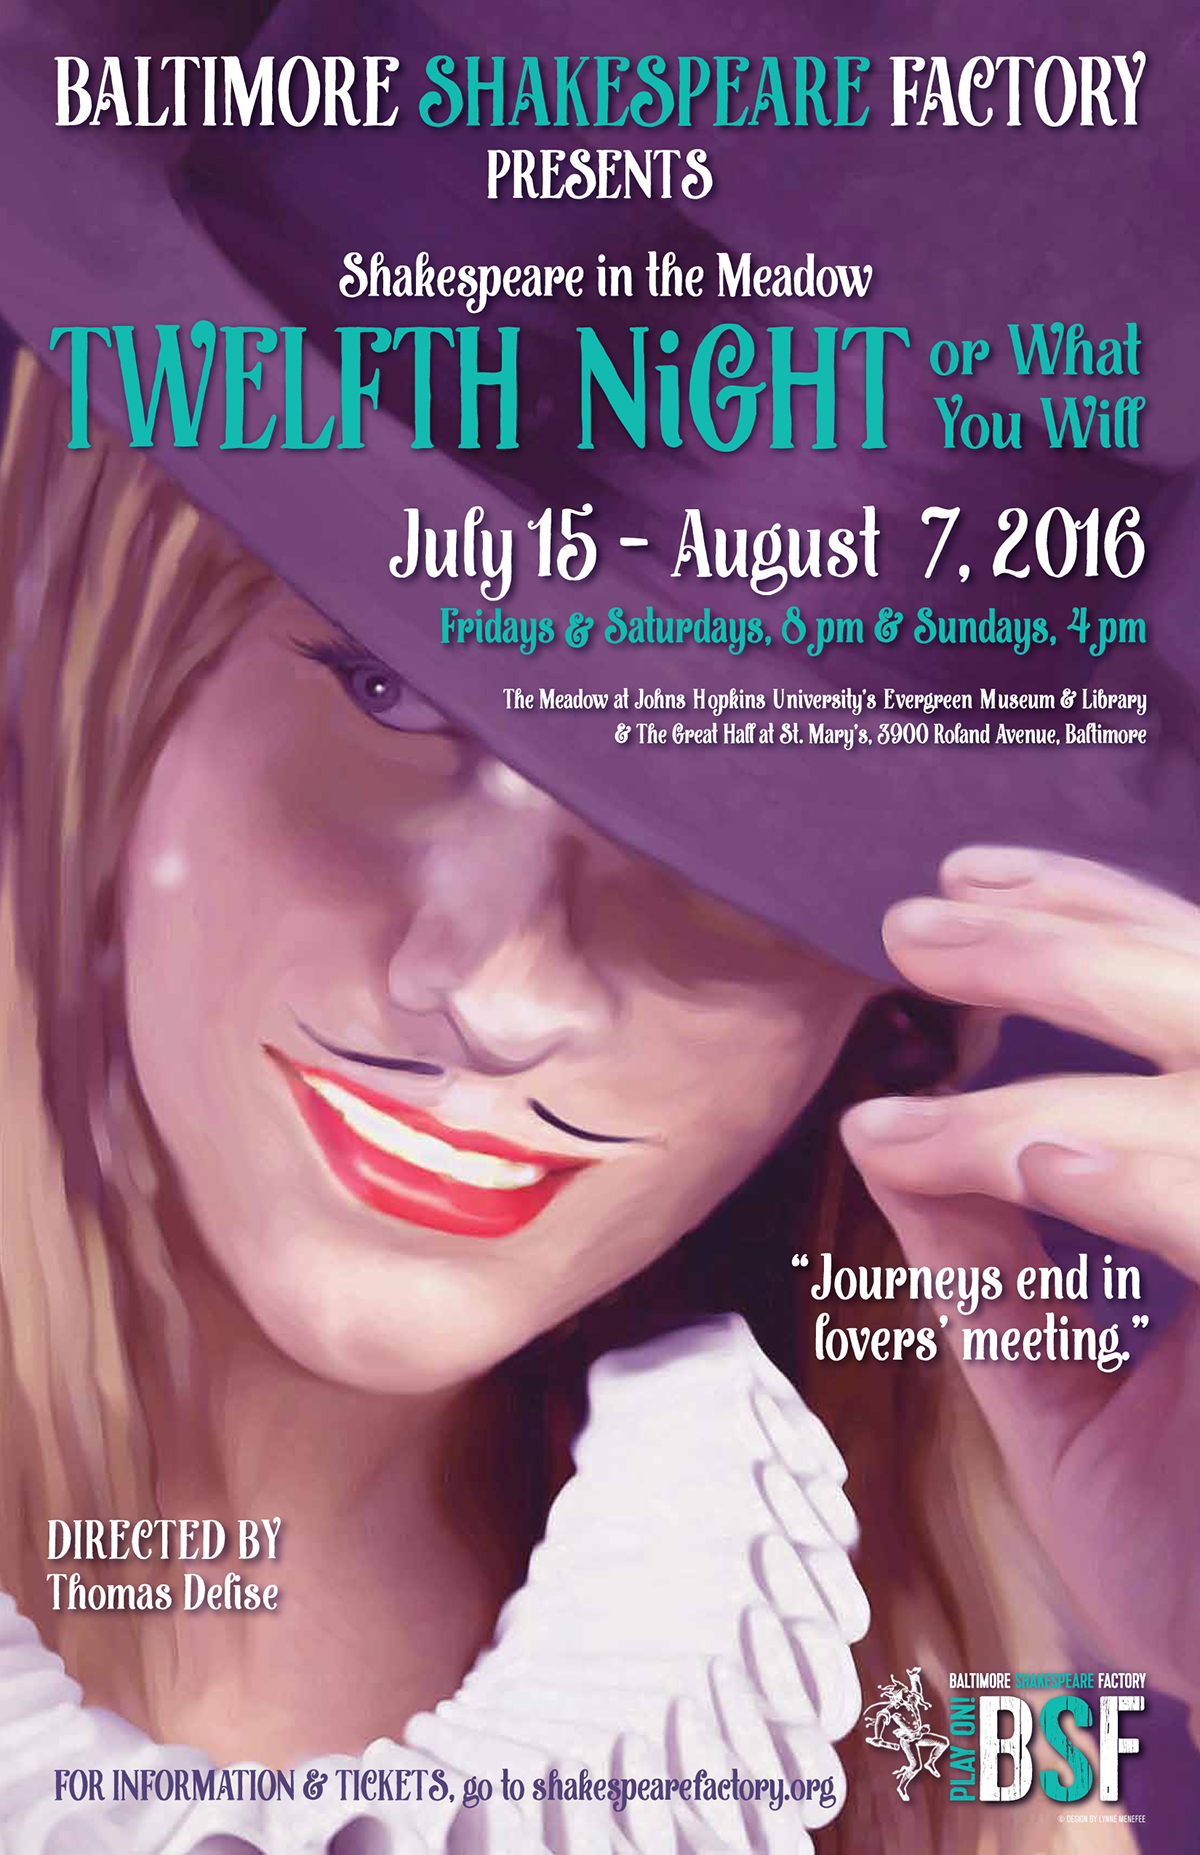 william shakespeare shakespeare Shakespeare in the meadow poster Promotion Baltimore Shakespeare Factory bsf Twelfth Night What You Will theater  comedy  summer Performance